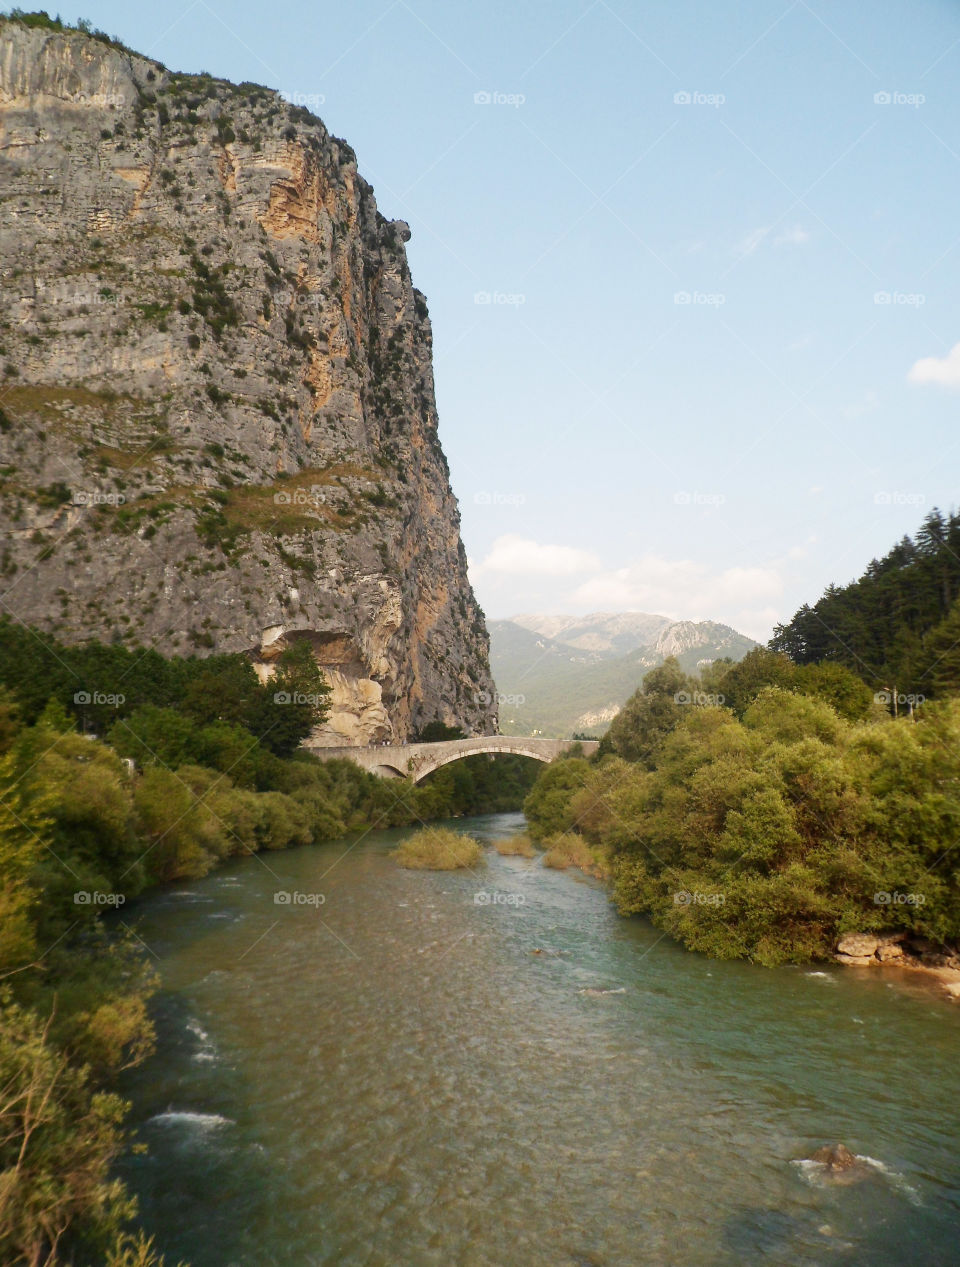 Bridge and scenic sight in the natural park Verdon in France